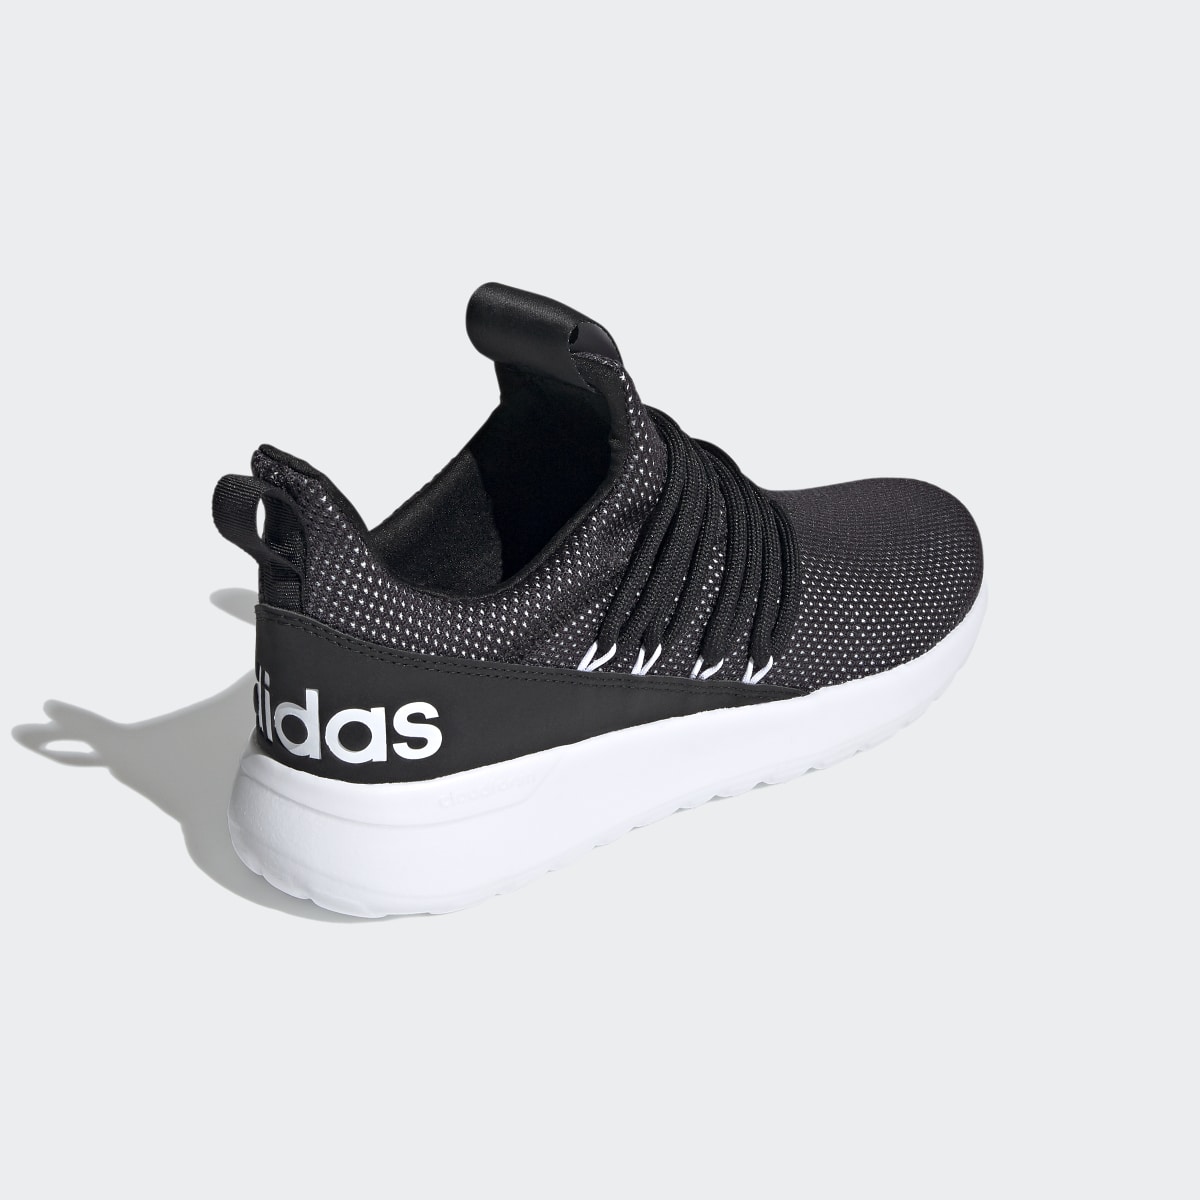 Adidas Lite Racer Adapt 3 Shoes. 6